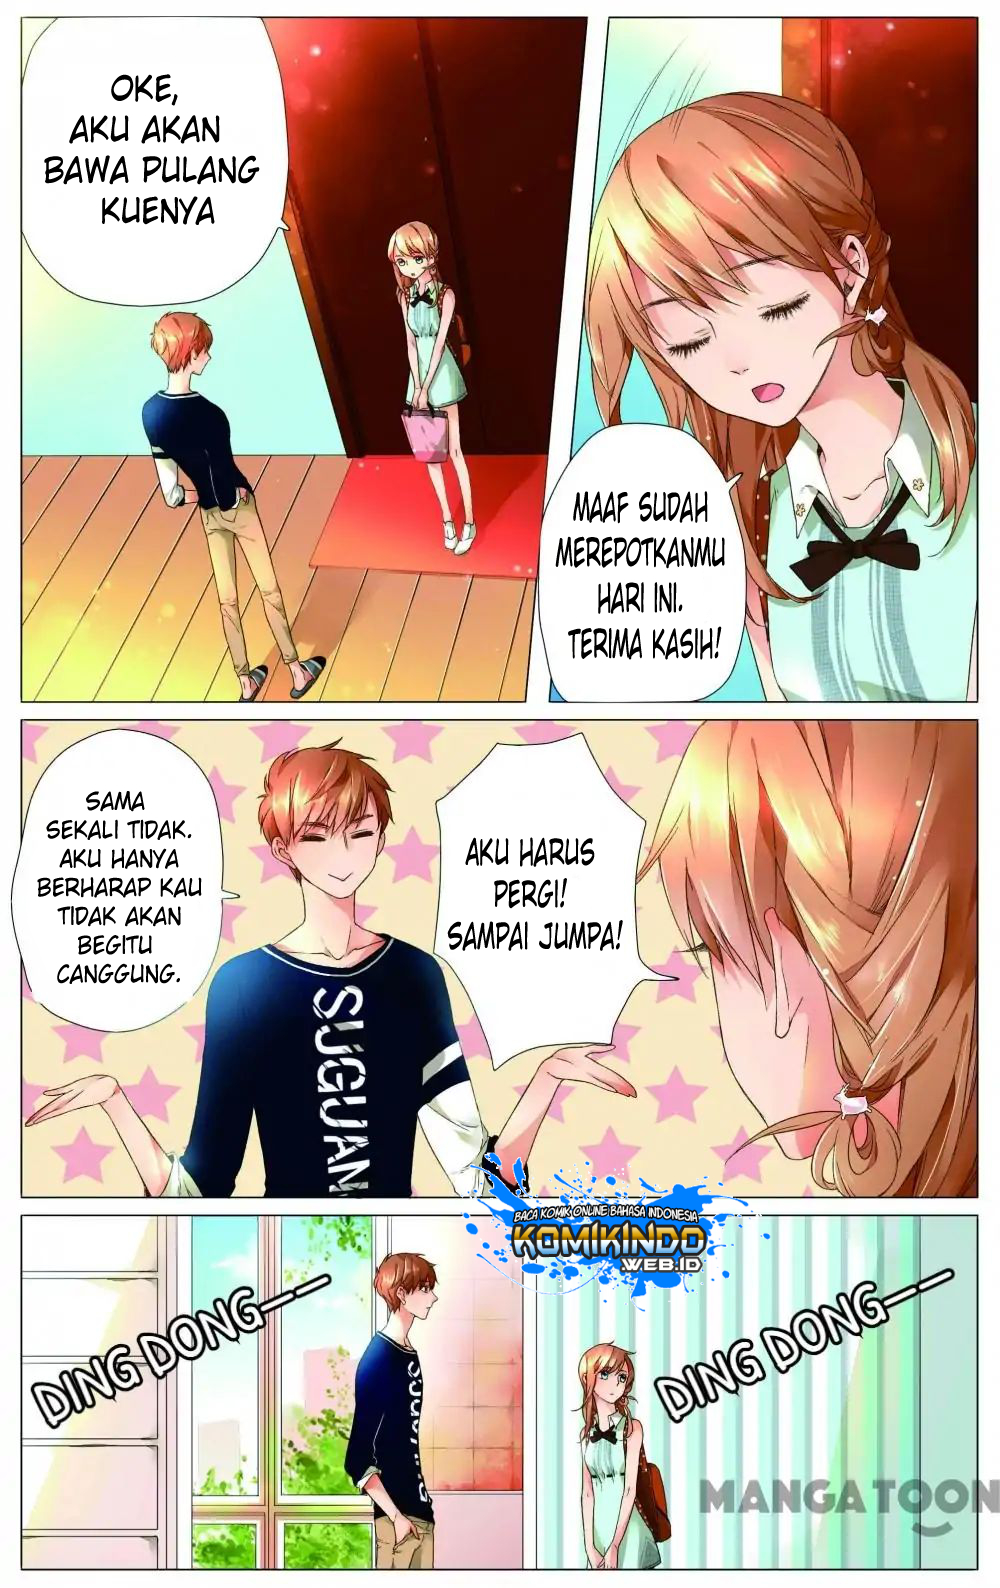 Love is a Cherry Color Chapter 09